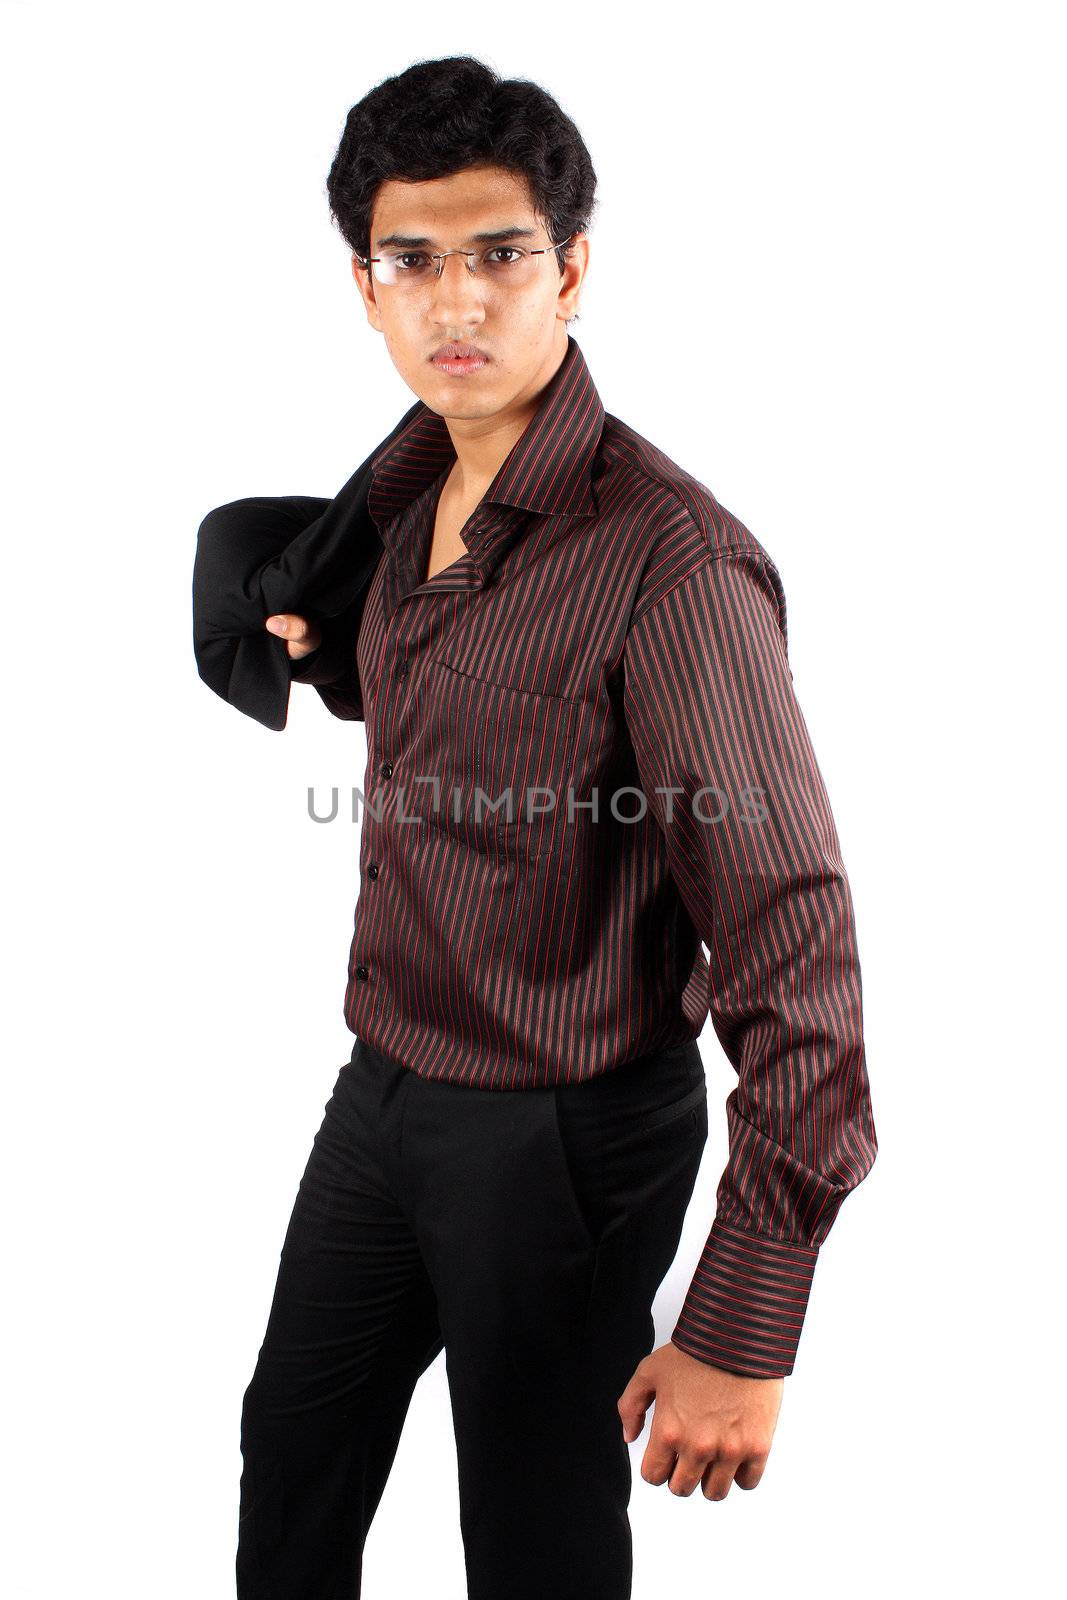 A smart young Indian guy, posing on a white studio background.